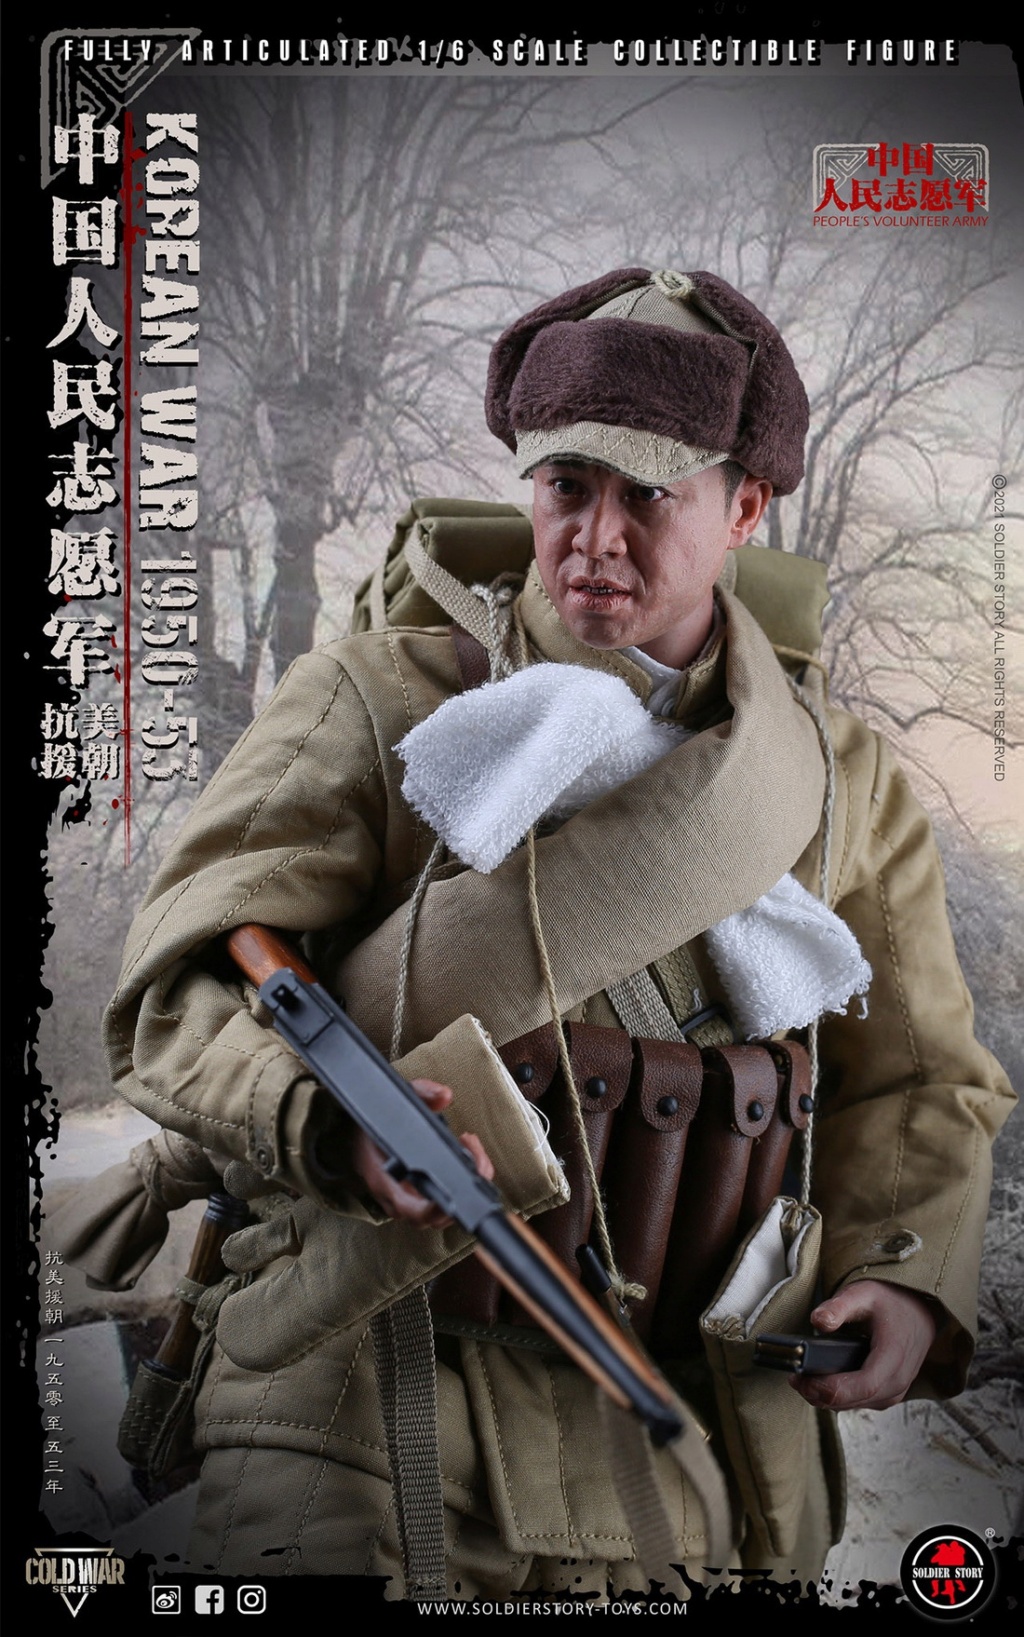 NEW PRODUCT: SOLDIER STORY: 1/6 Chinese People’s Volunteers 1950-53 Collectible Action Figure (#SS-124) B6fbd810